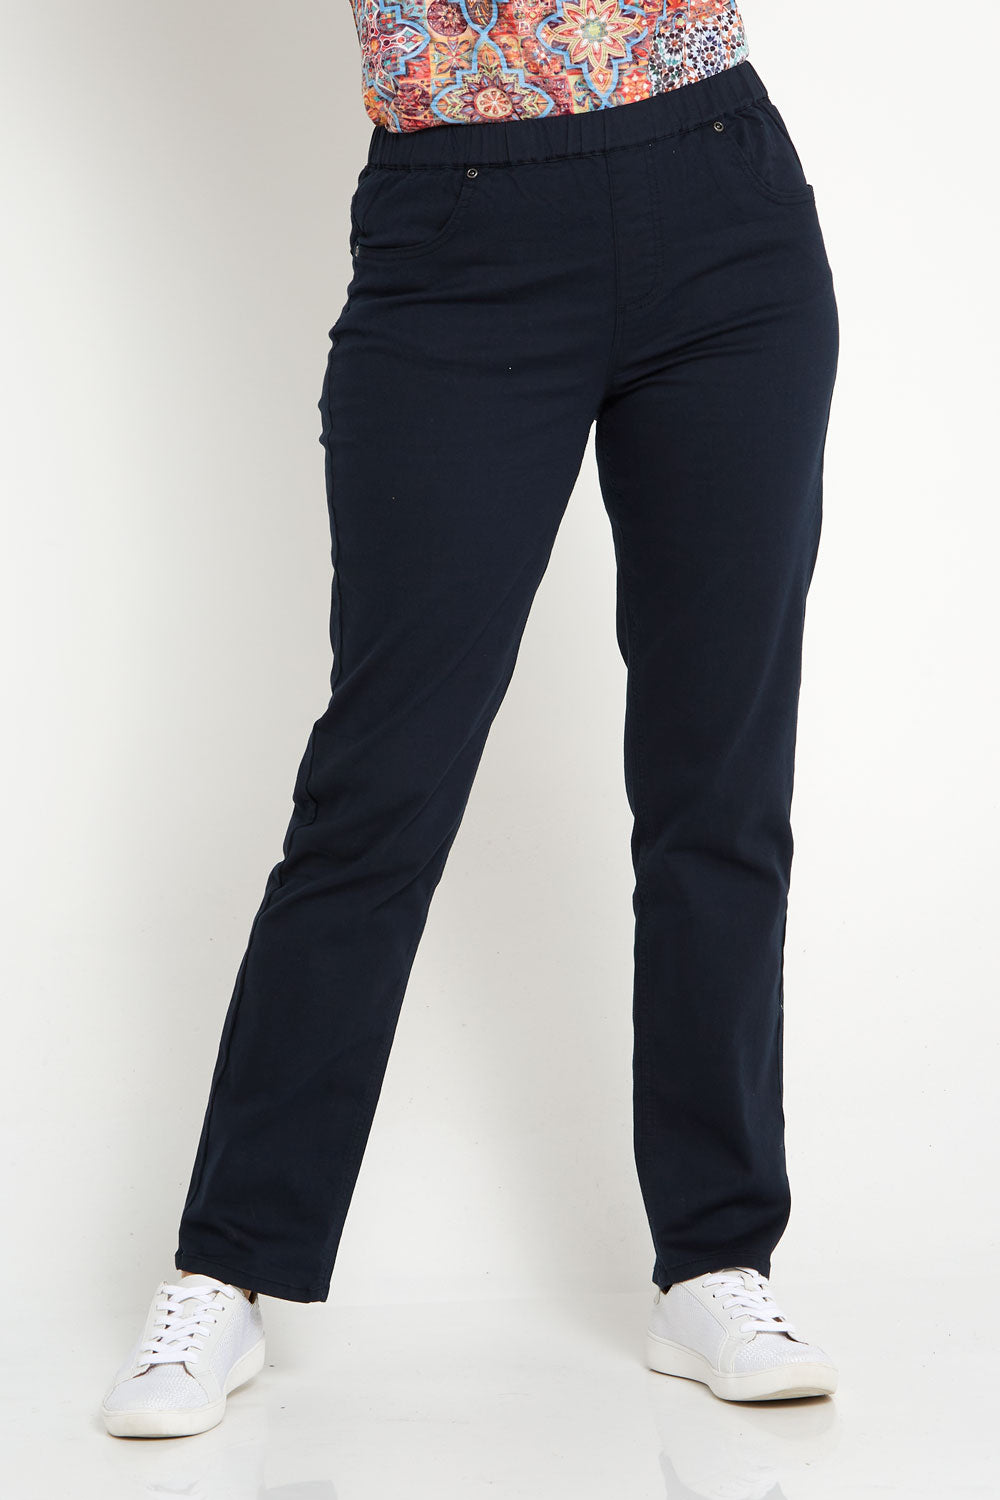 Pull On Plain Jeans - Navy, Mature Women's Jeans